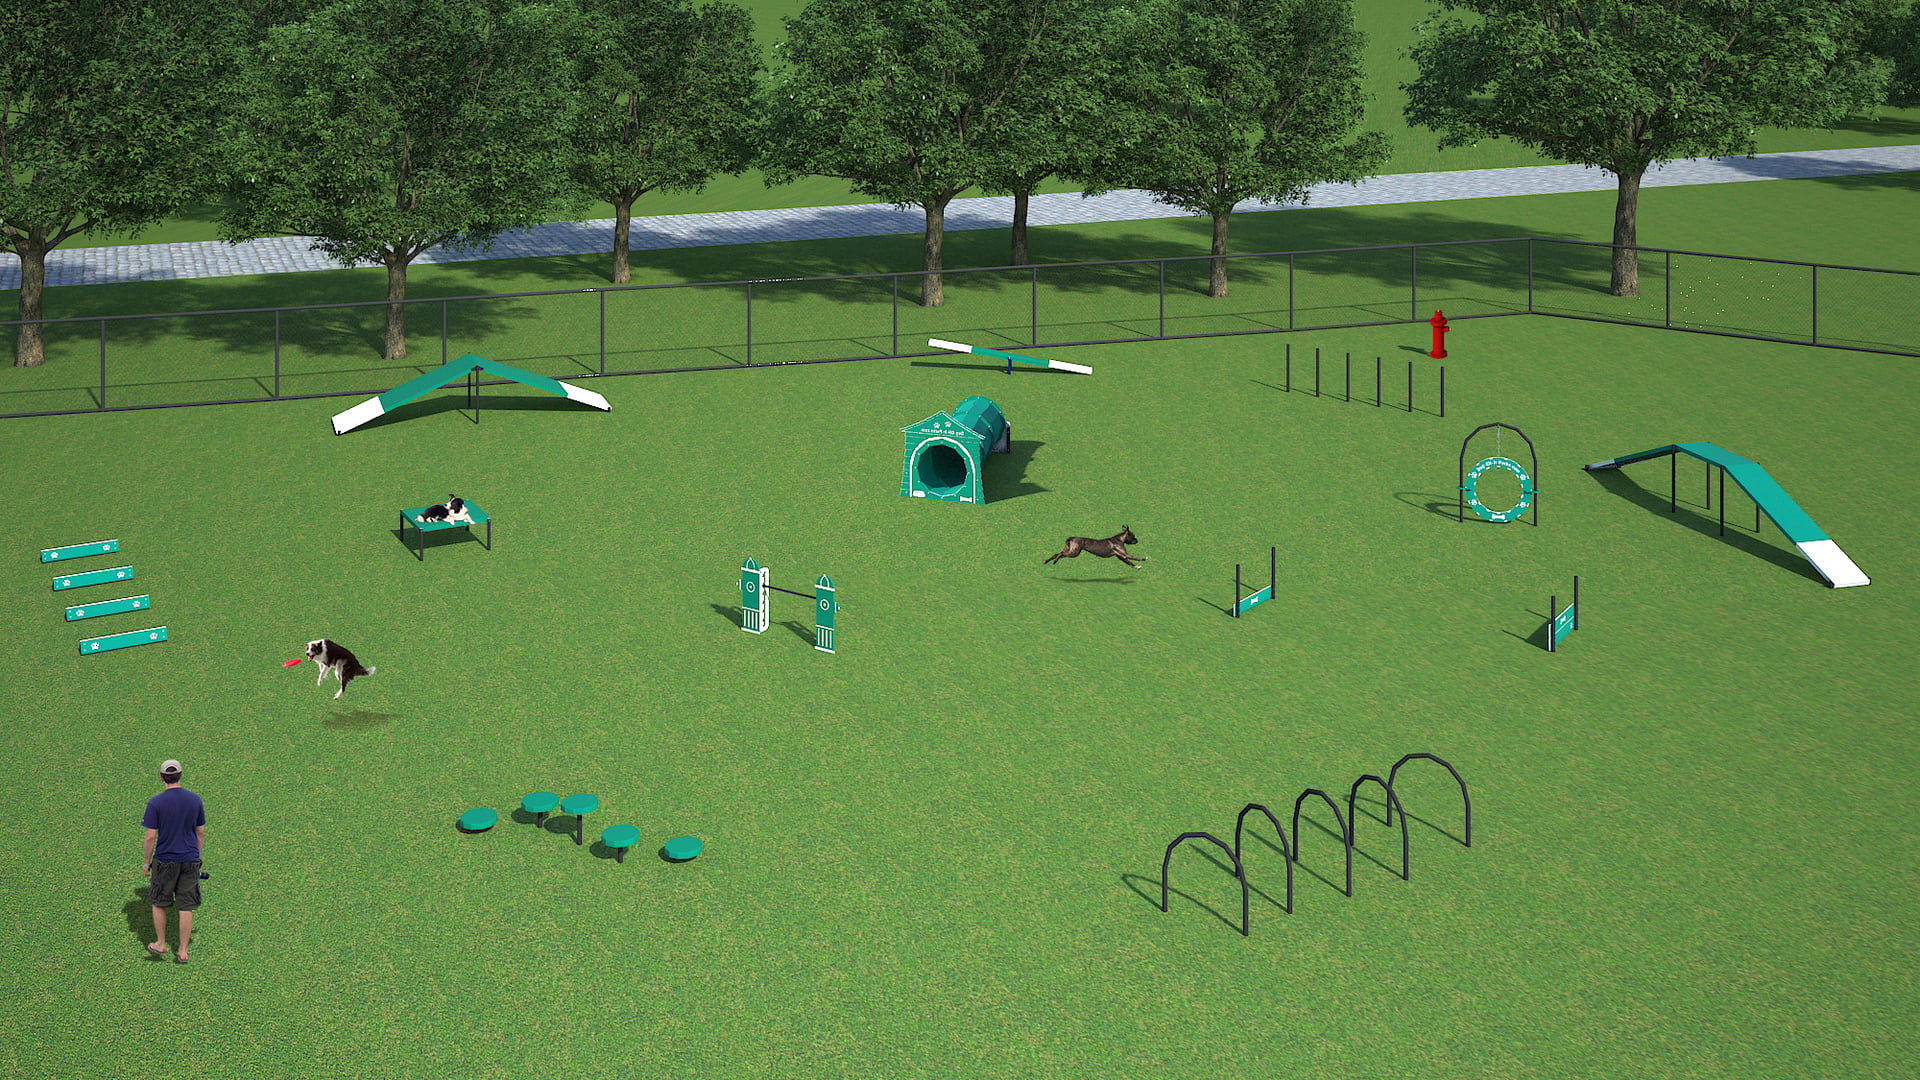 Dog Park Complete System - A-Frame, Ramps, Teeter Totter, Hoops, Jumps,  Hurdles, Barrel, Wait Table, Weave Poles - 15 Agility Obstacles - Practice  Sports